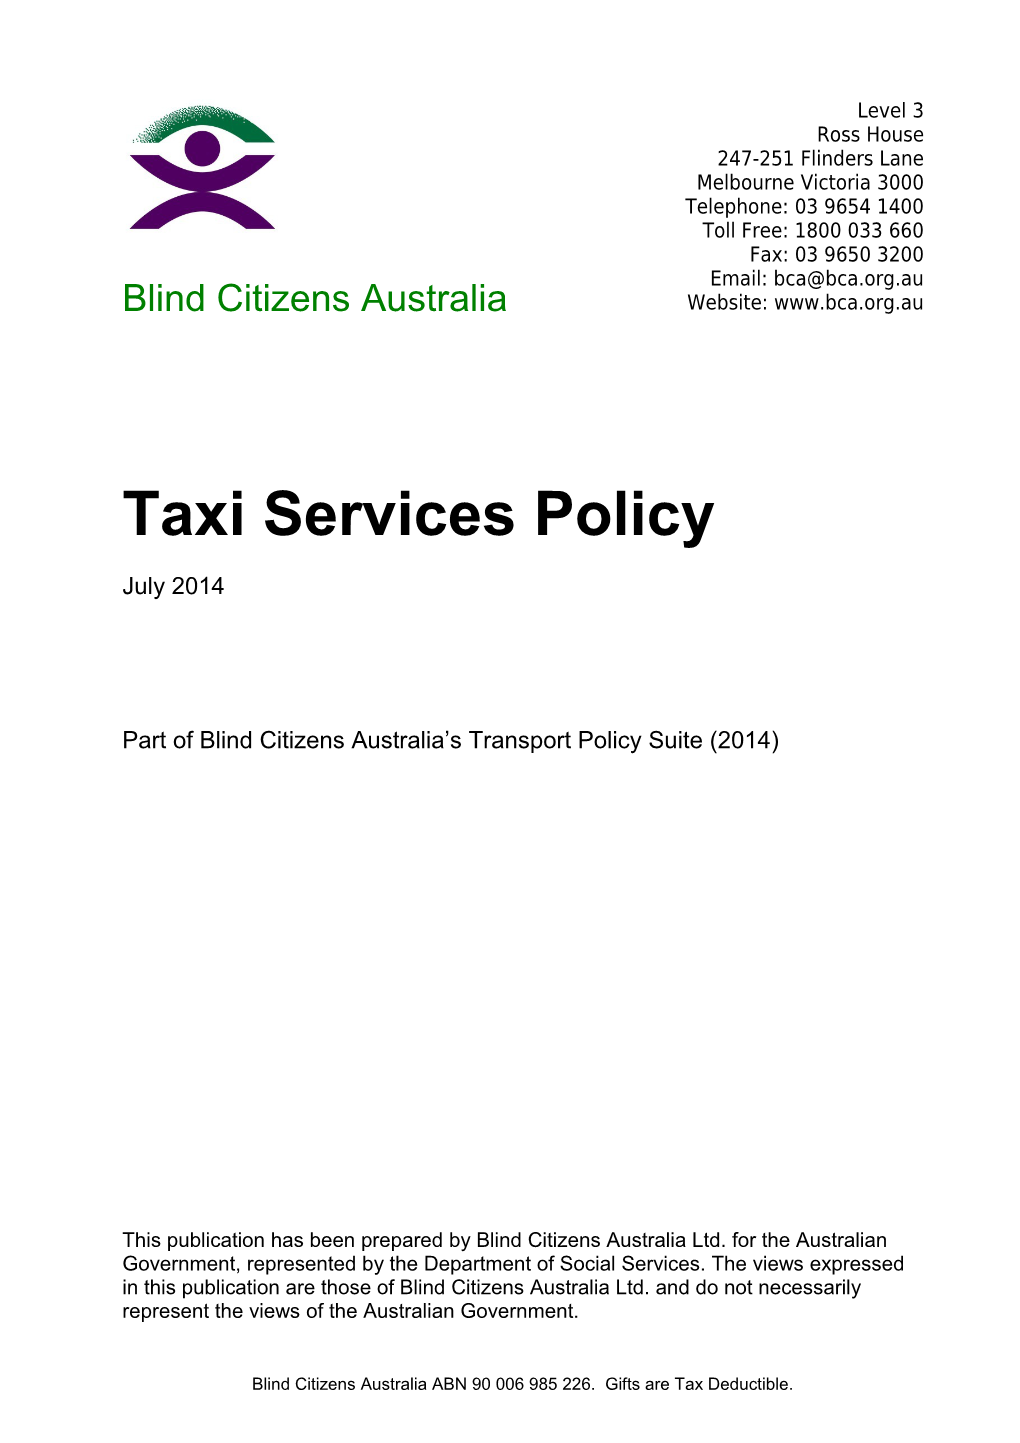 Taxi Services Policy